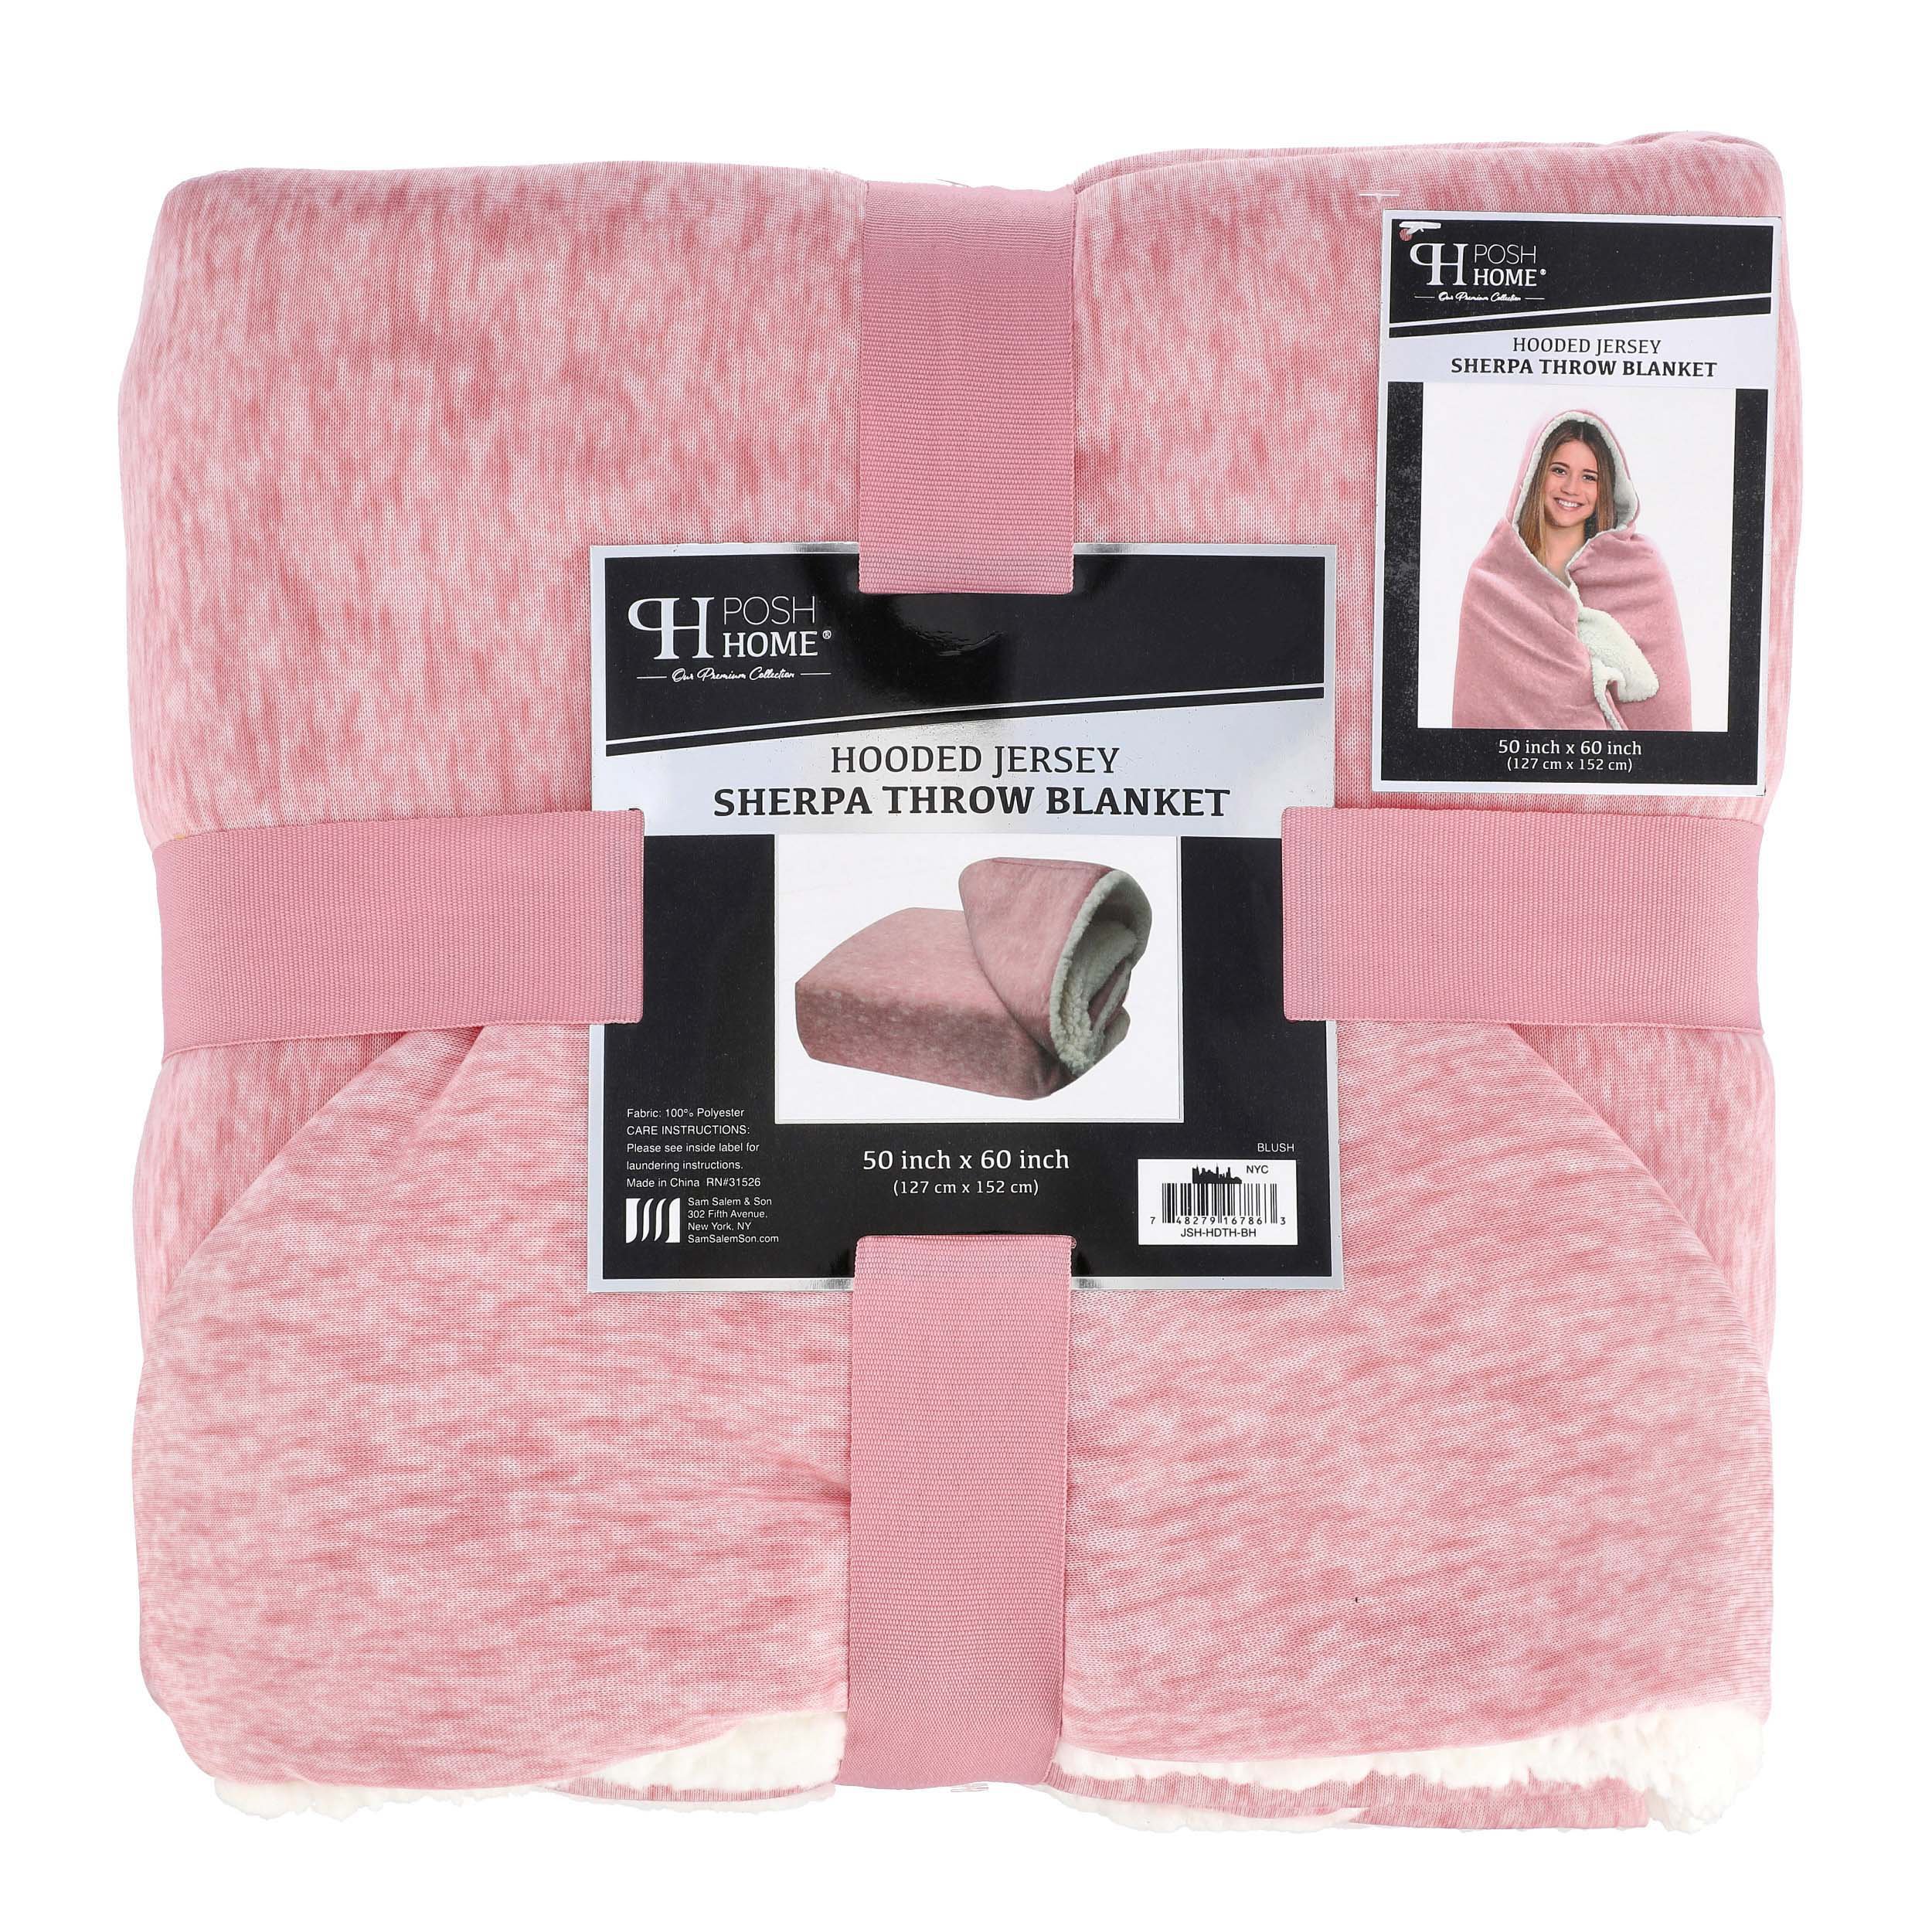 Posh Home Blush Hooded Jersey Sherpa Throw Blanket Shop Blankets Throws At HEB